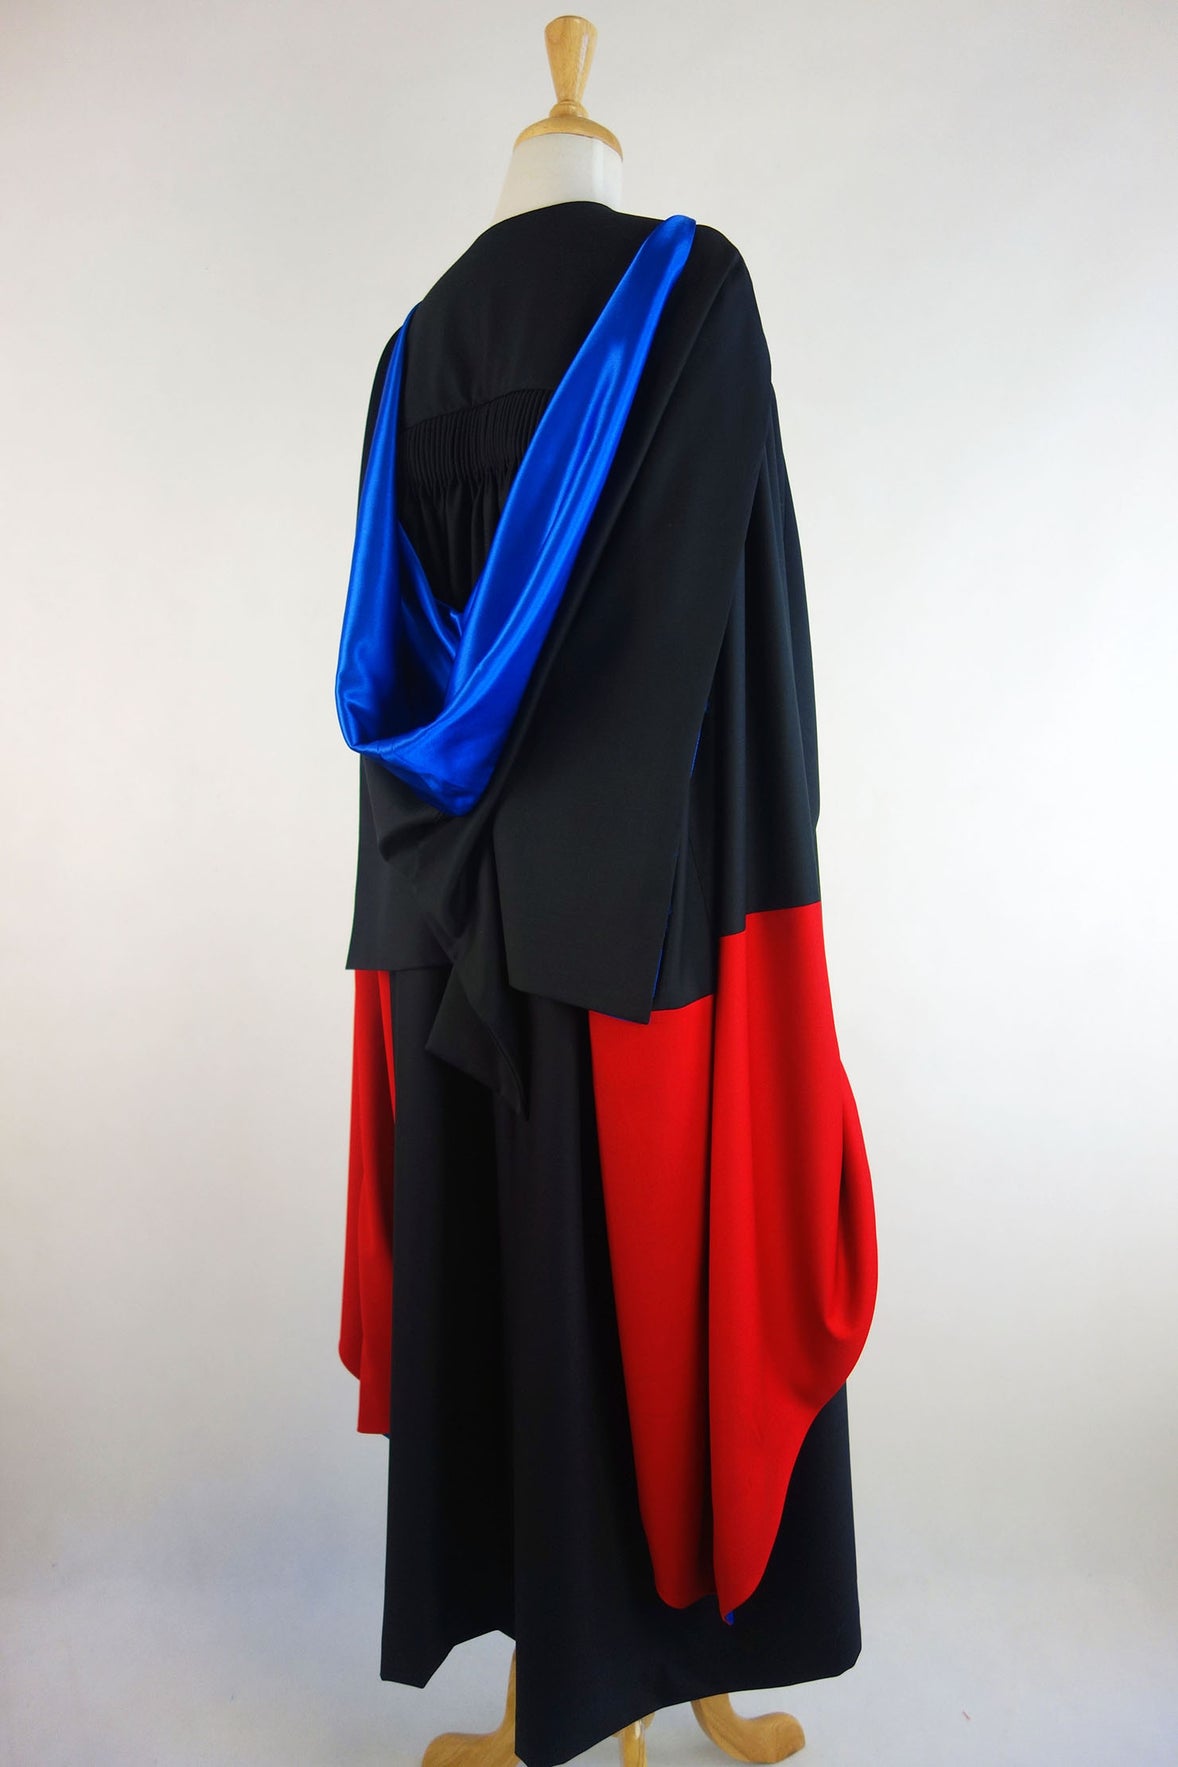 International PhD or Doctoral Gown